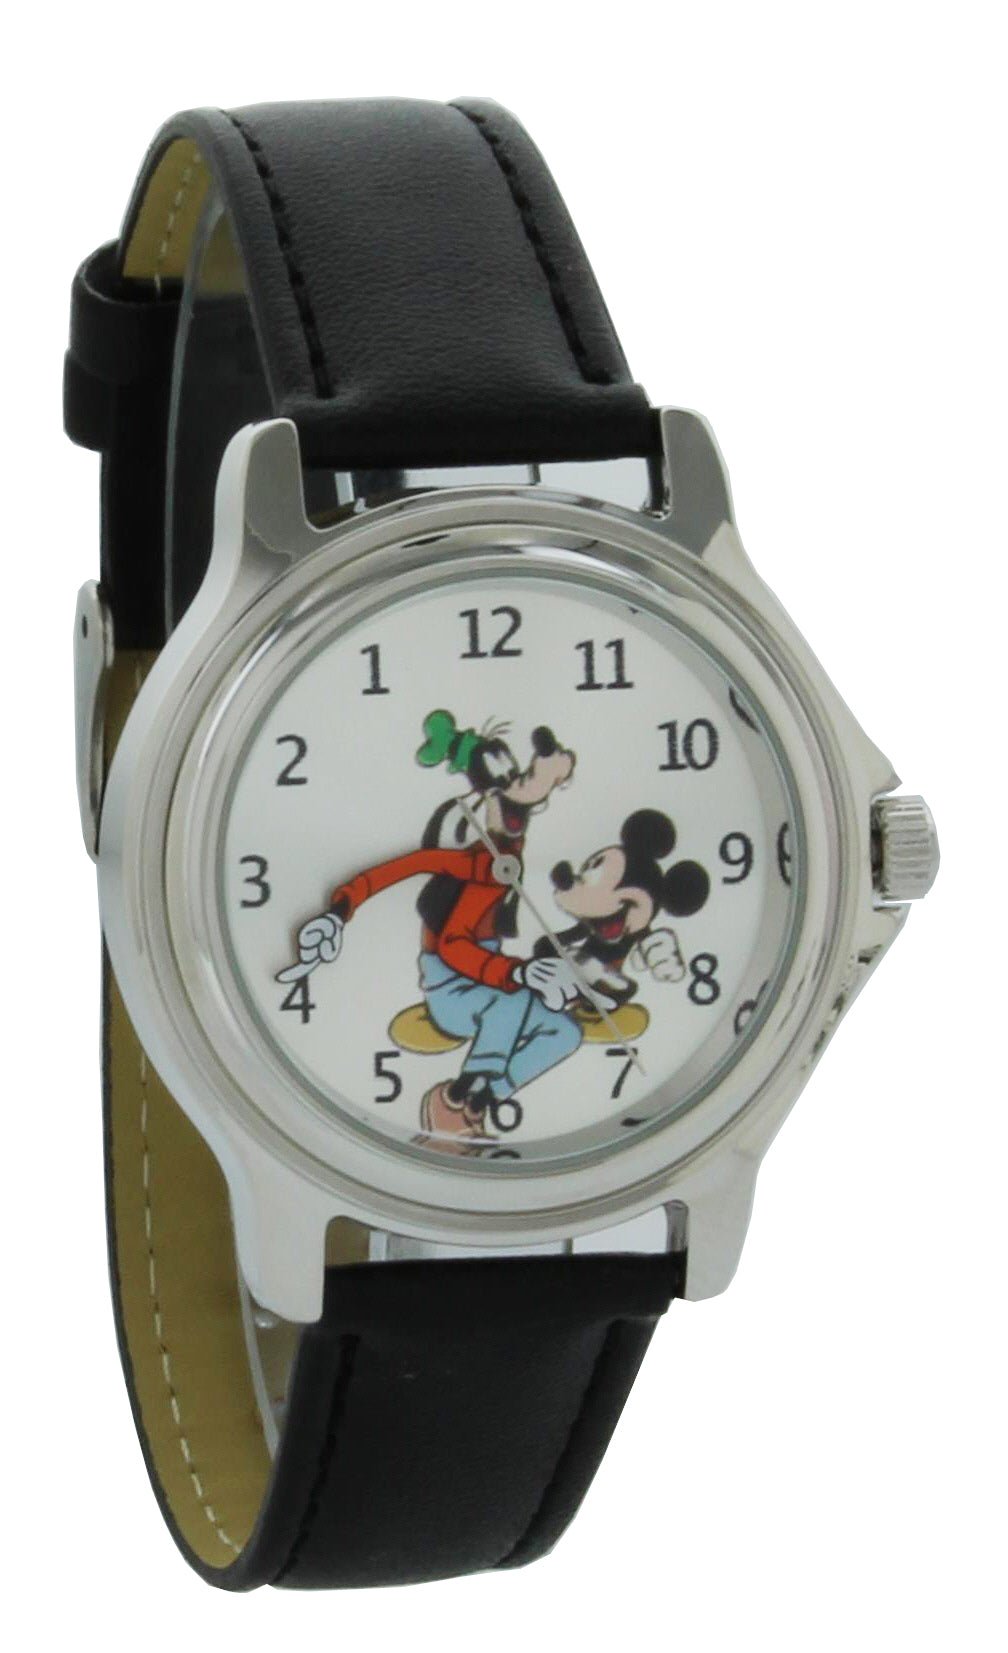 Model: Vintage Style Backward Ticking Watch with Goofy and Micky Mouse